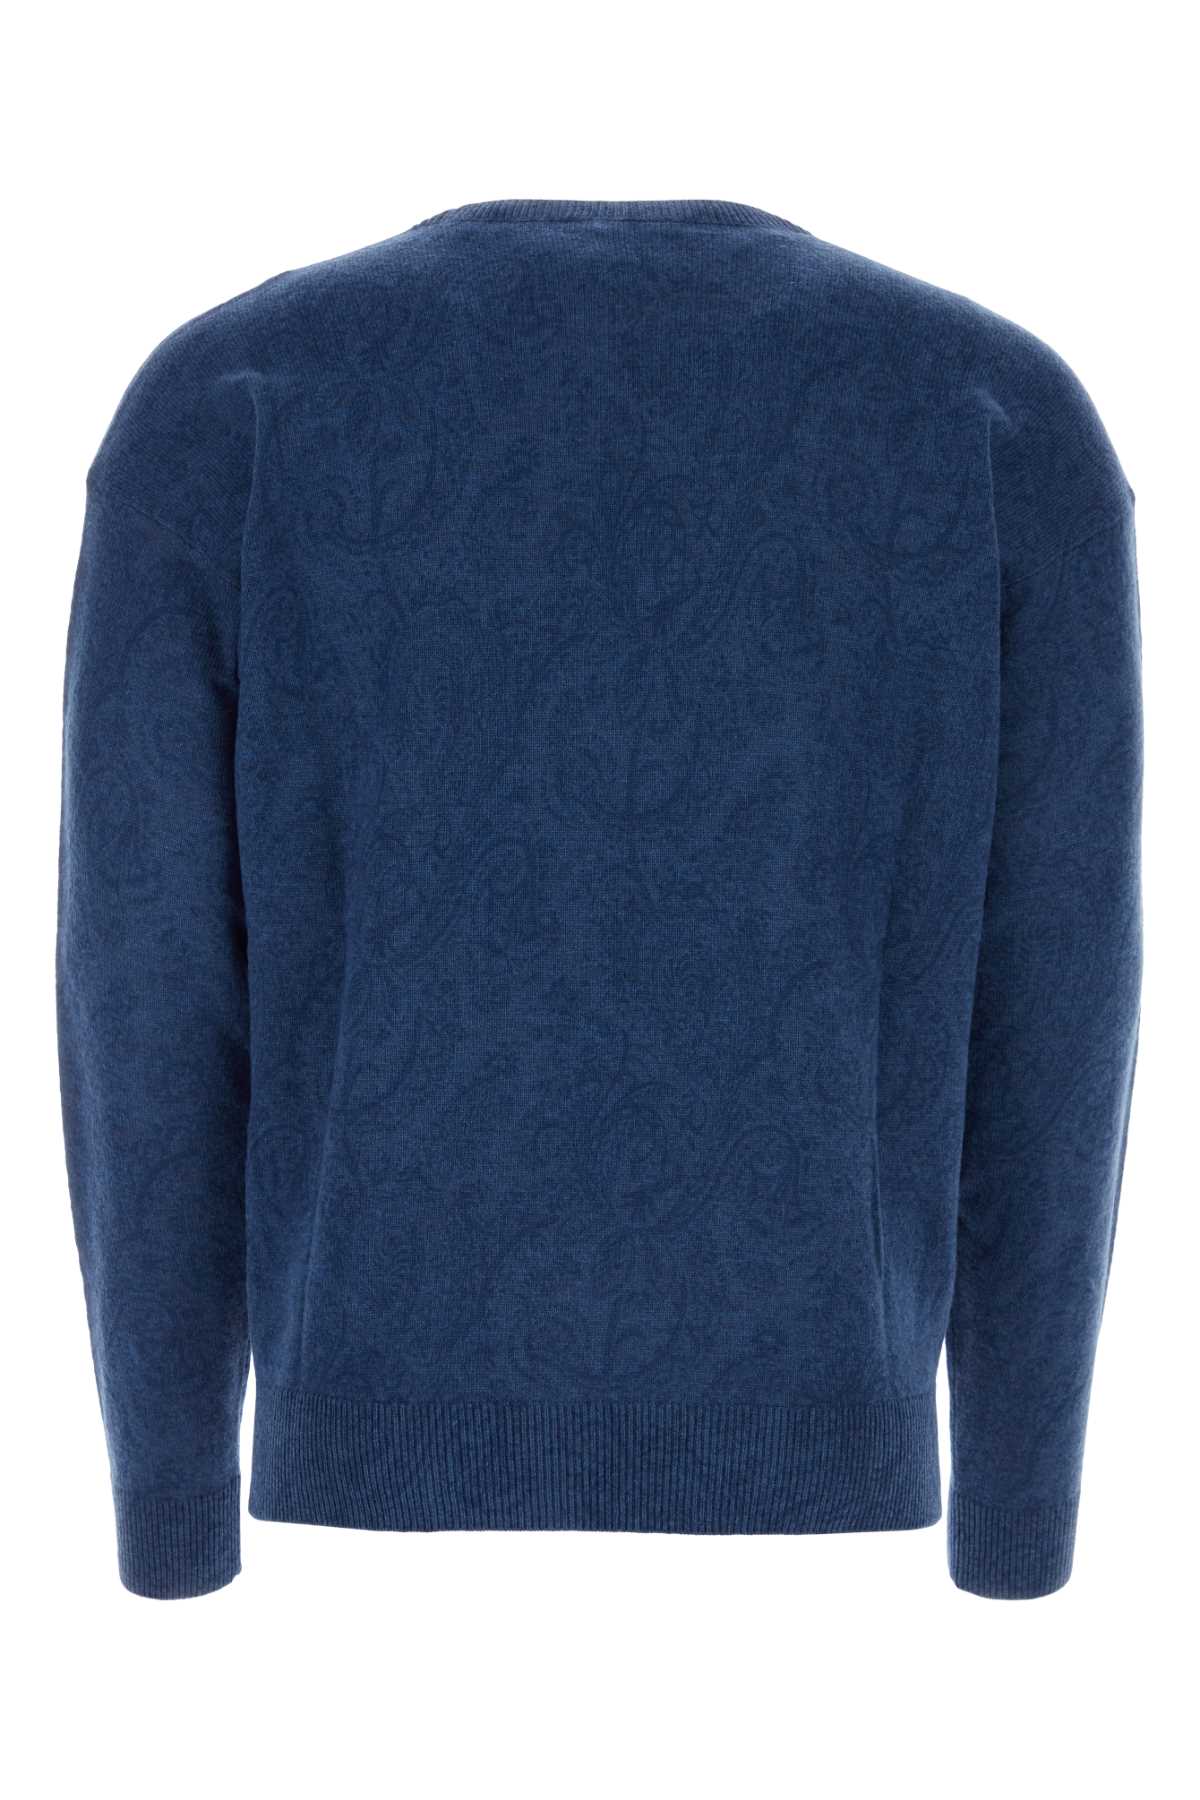 Etro Embroidered Wool Sweater In 200